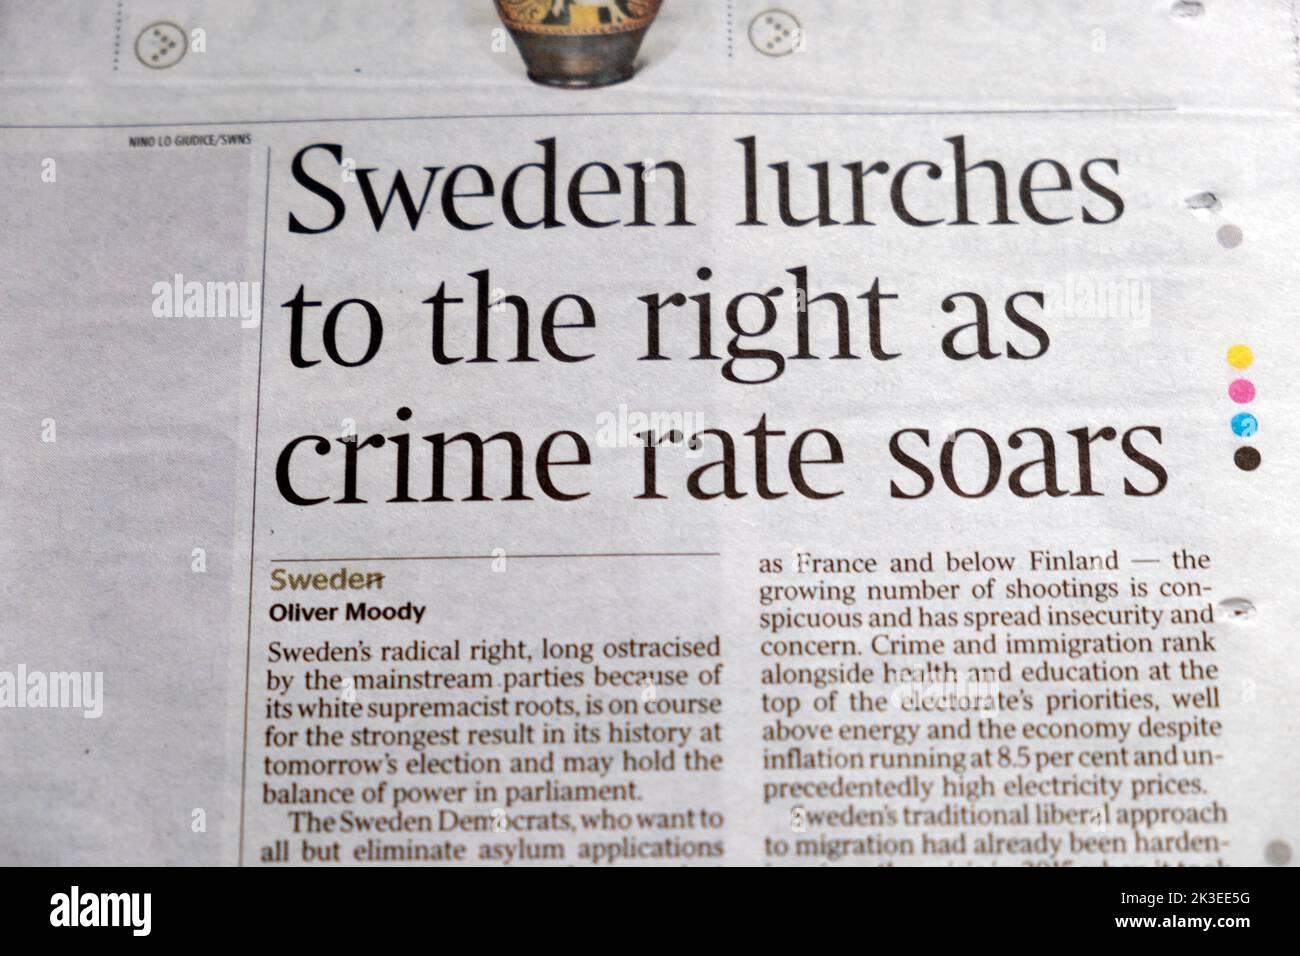 'Sweden lurches to the right as crime rate soars' The Times newspaper headline article clipping cutting 10 September 2022 London UK Stock Photo